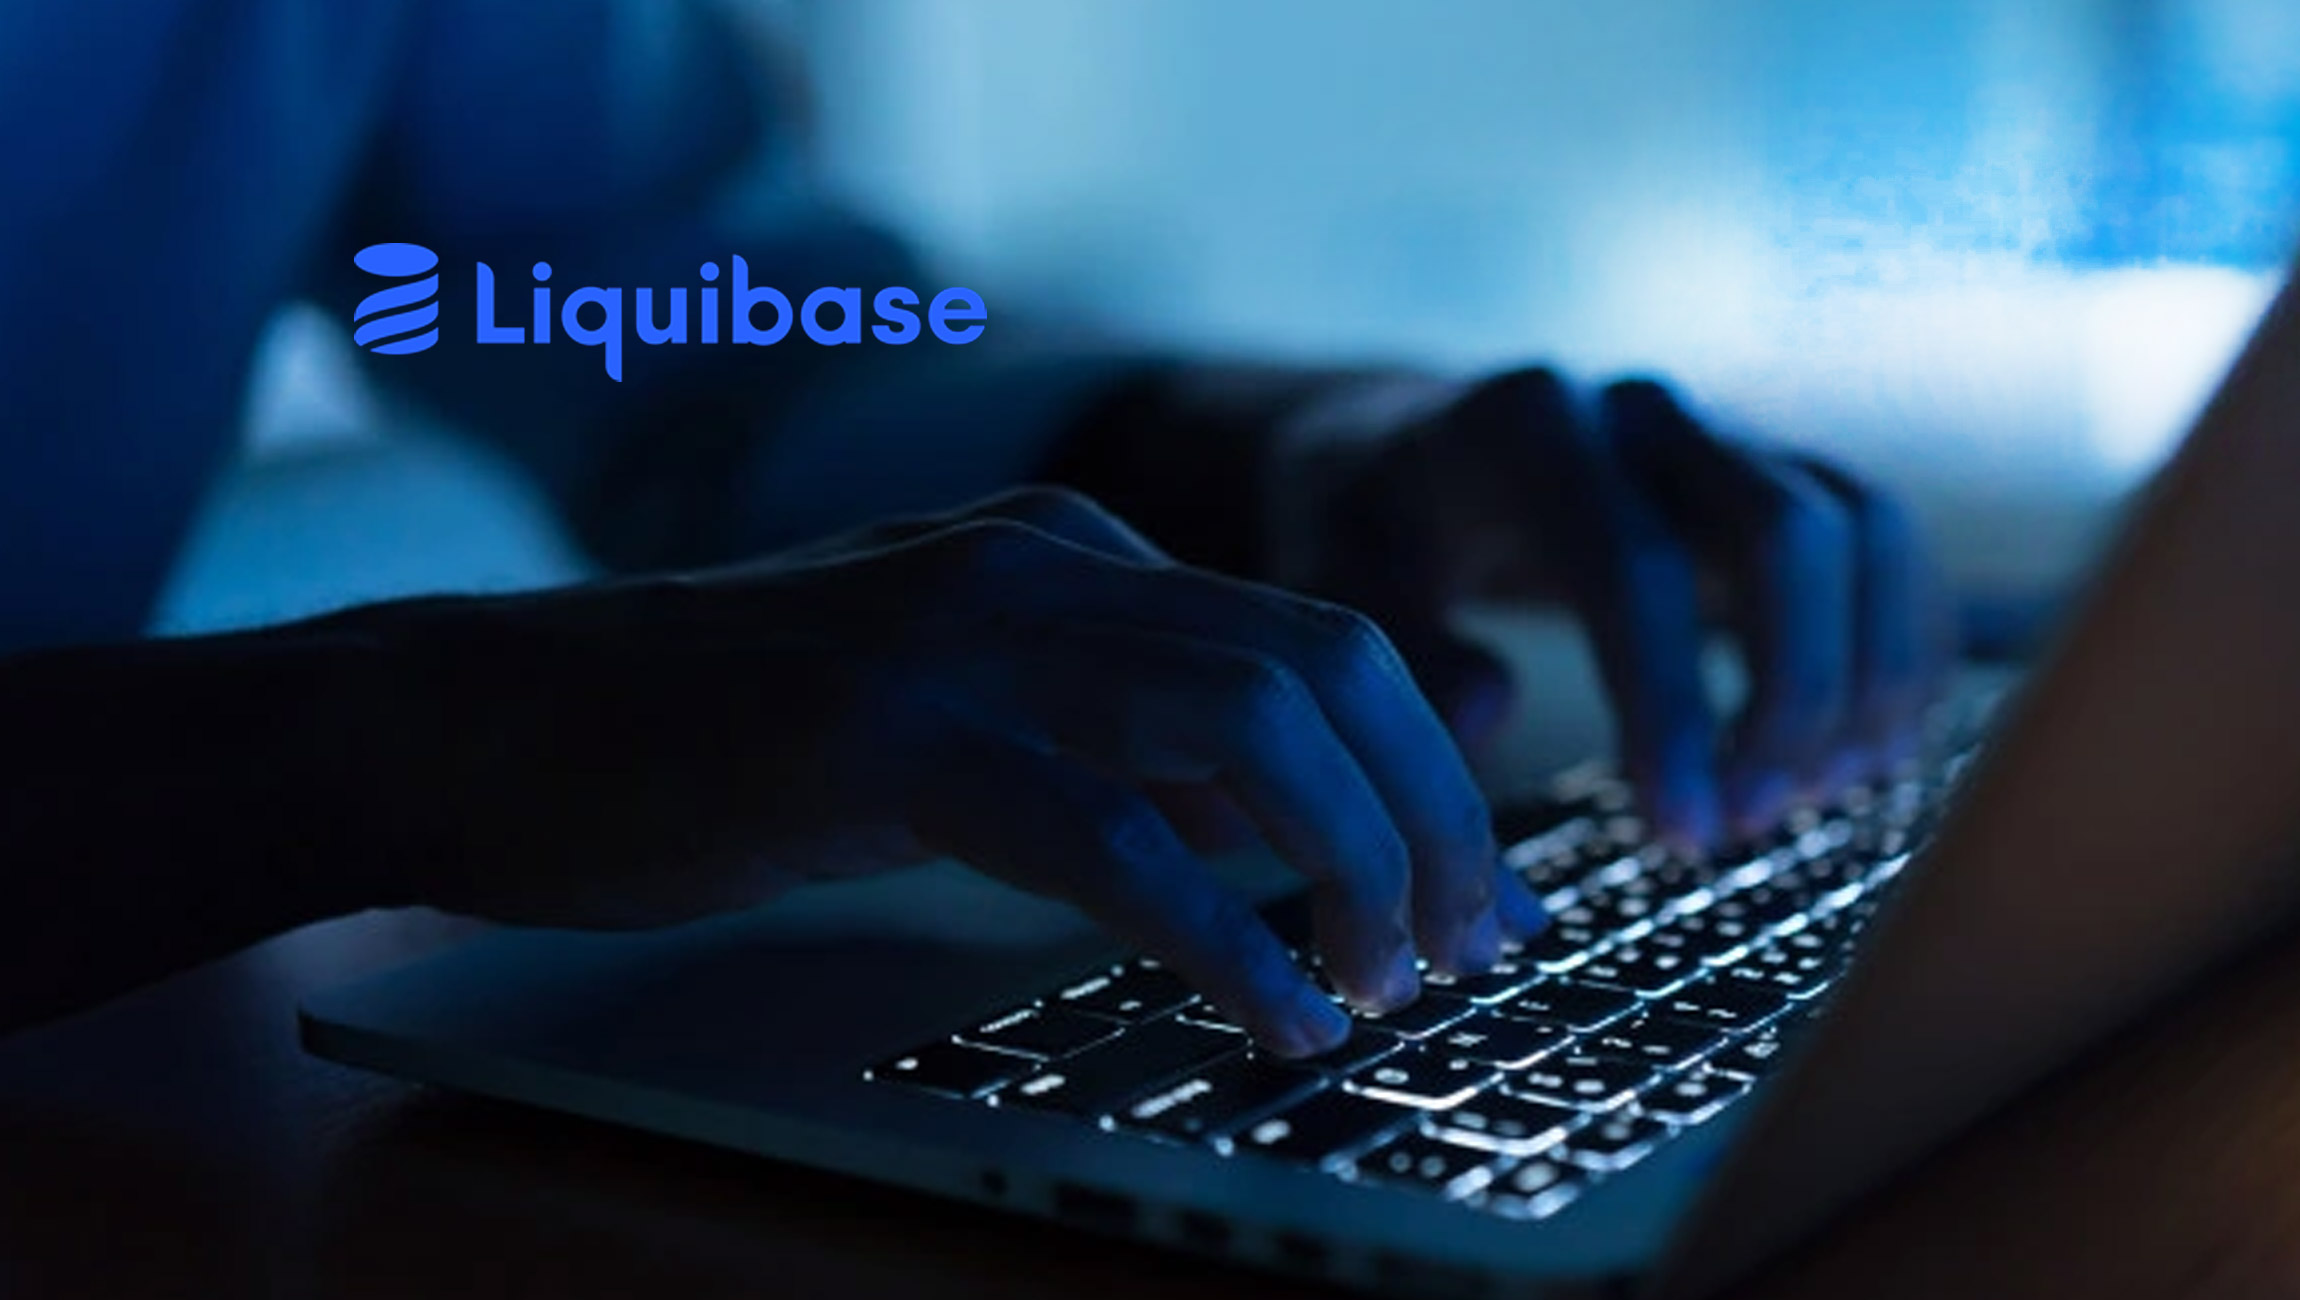 Liquibase Successfully Completes SOC 2 Type 2 Certification